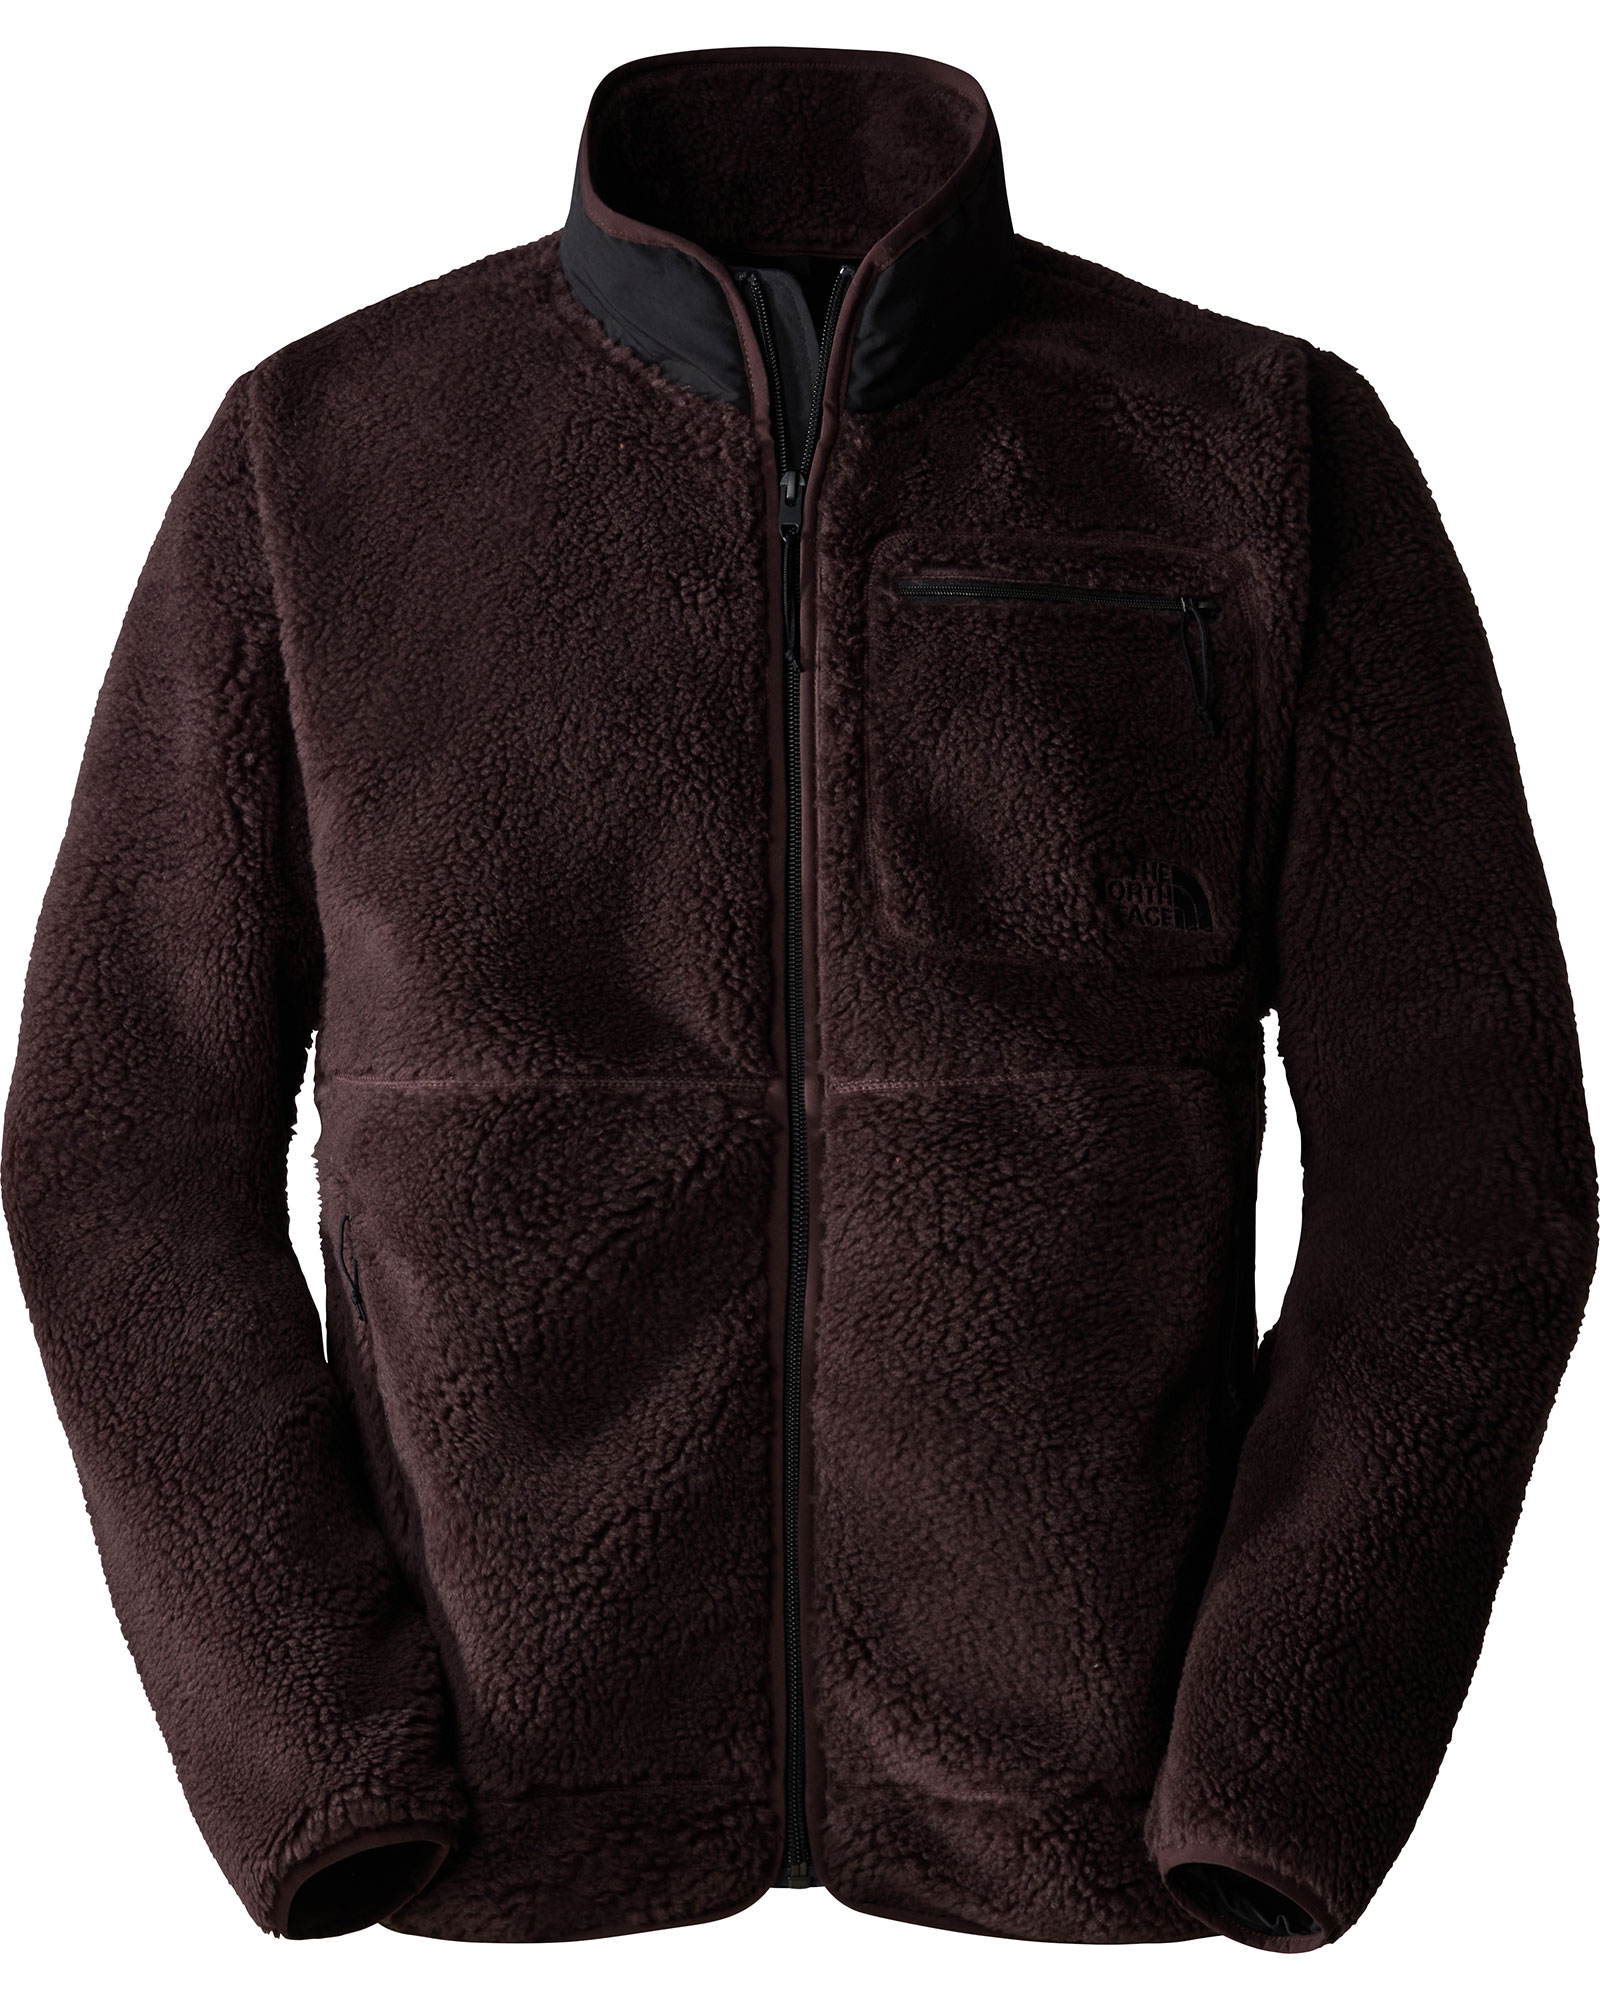 The North Face Men’s Extreme Pile Full Zip Jacket - Coal Brown L